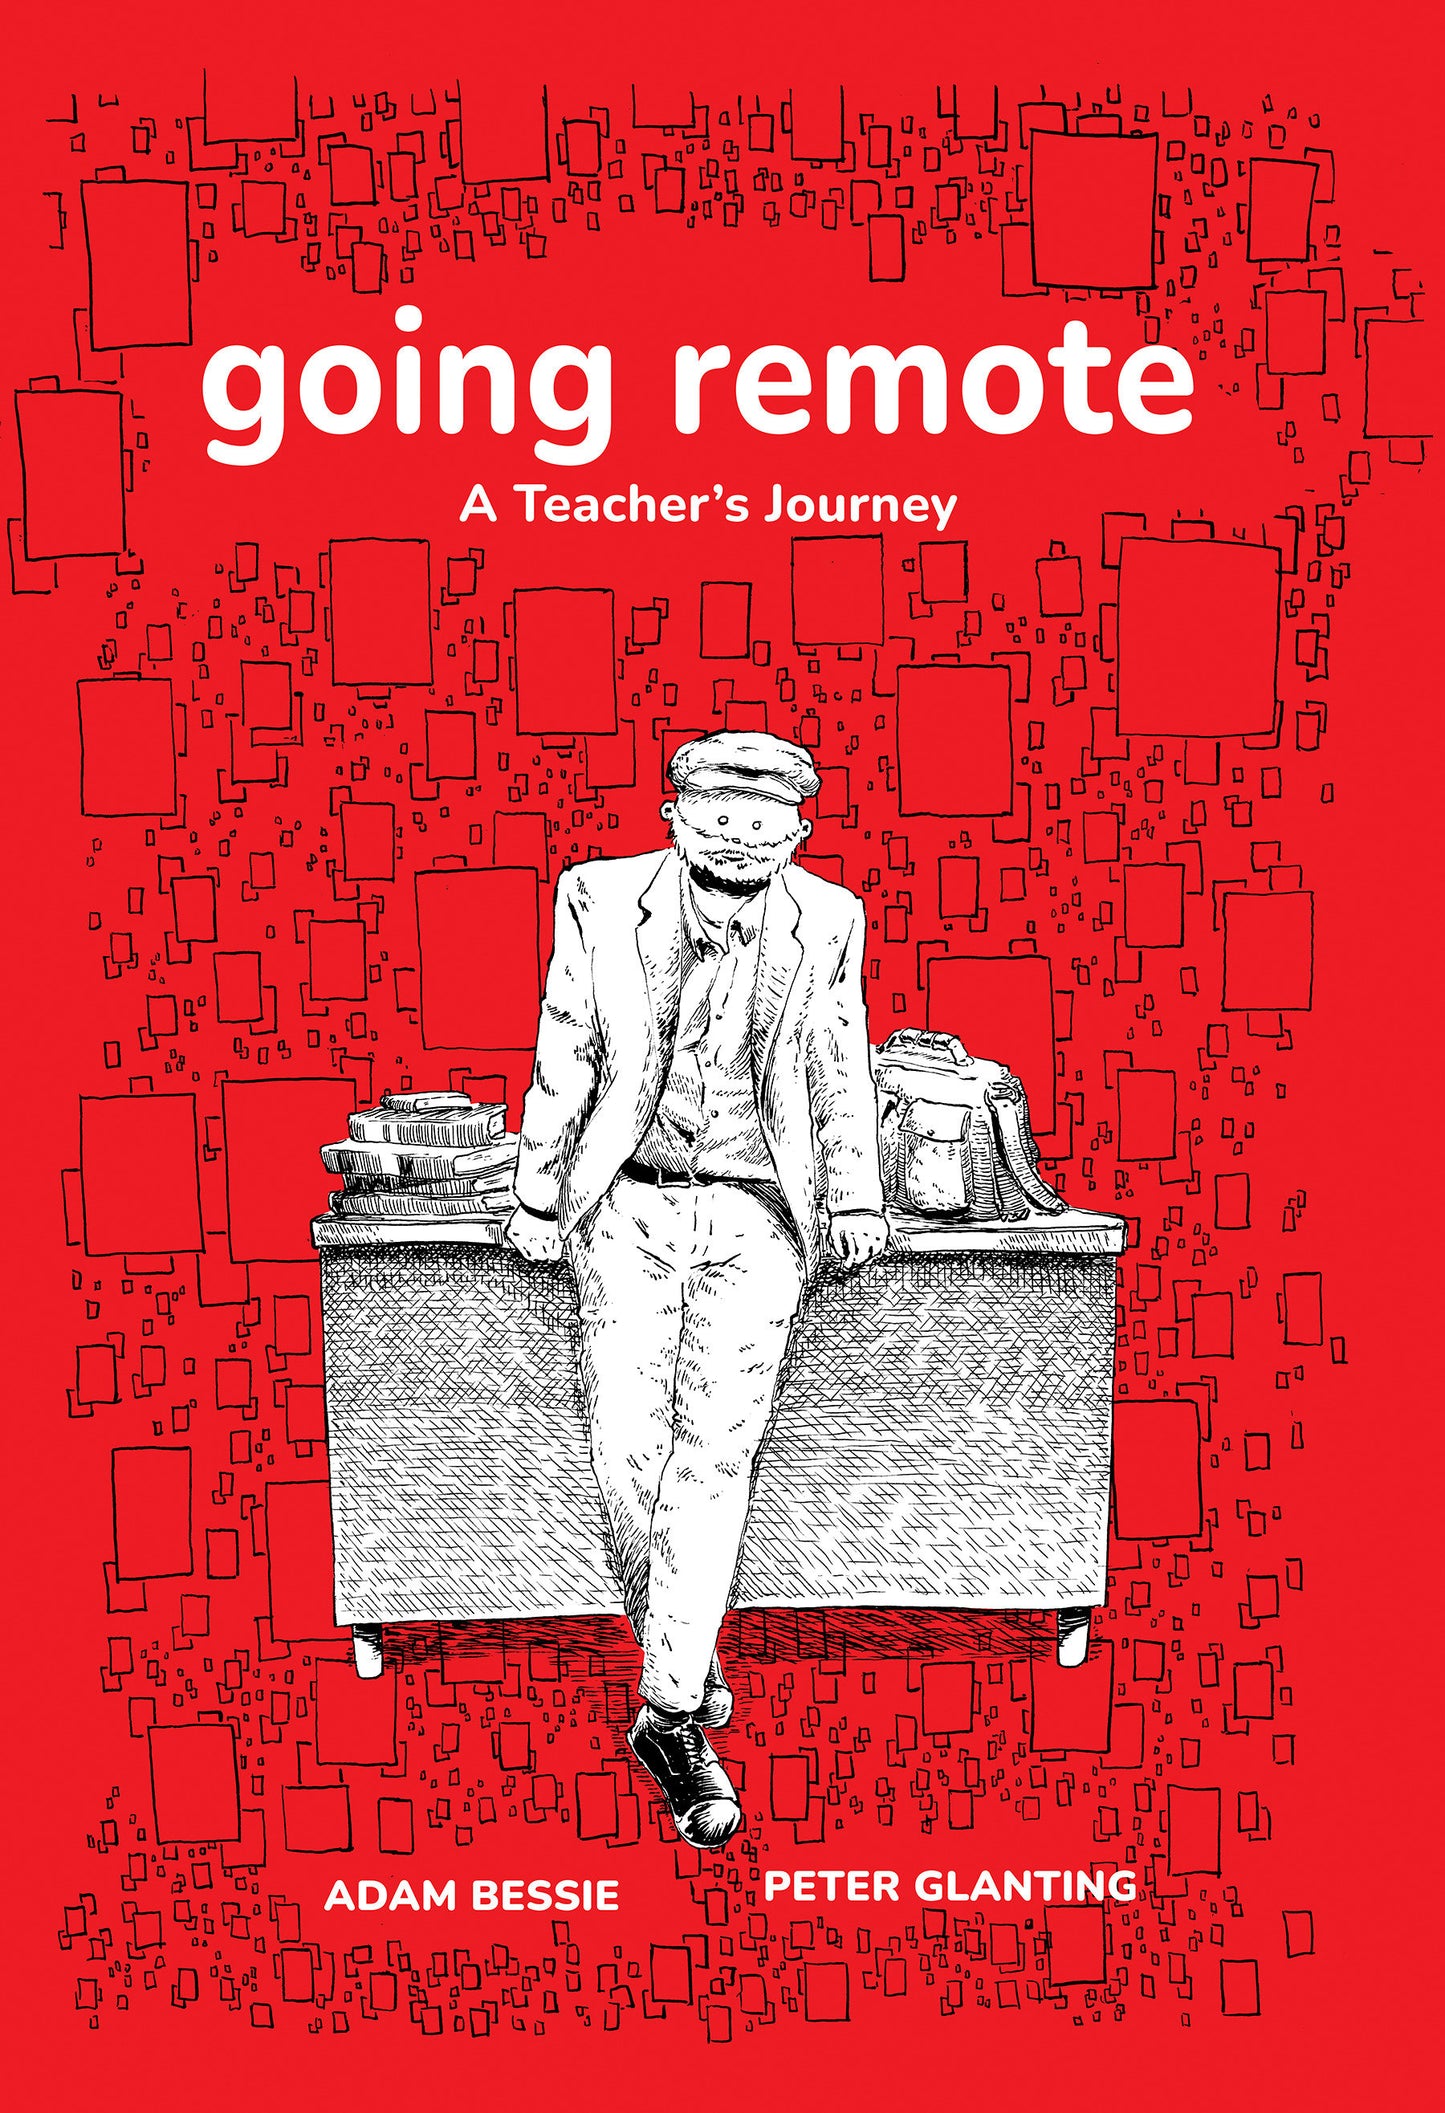 Going Remote